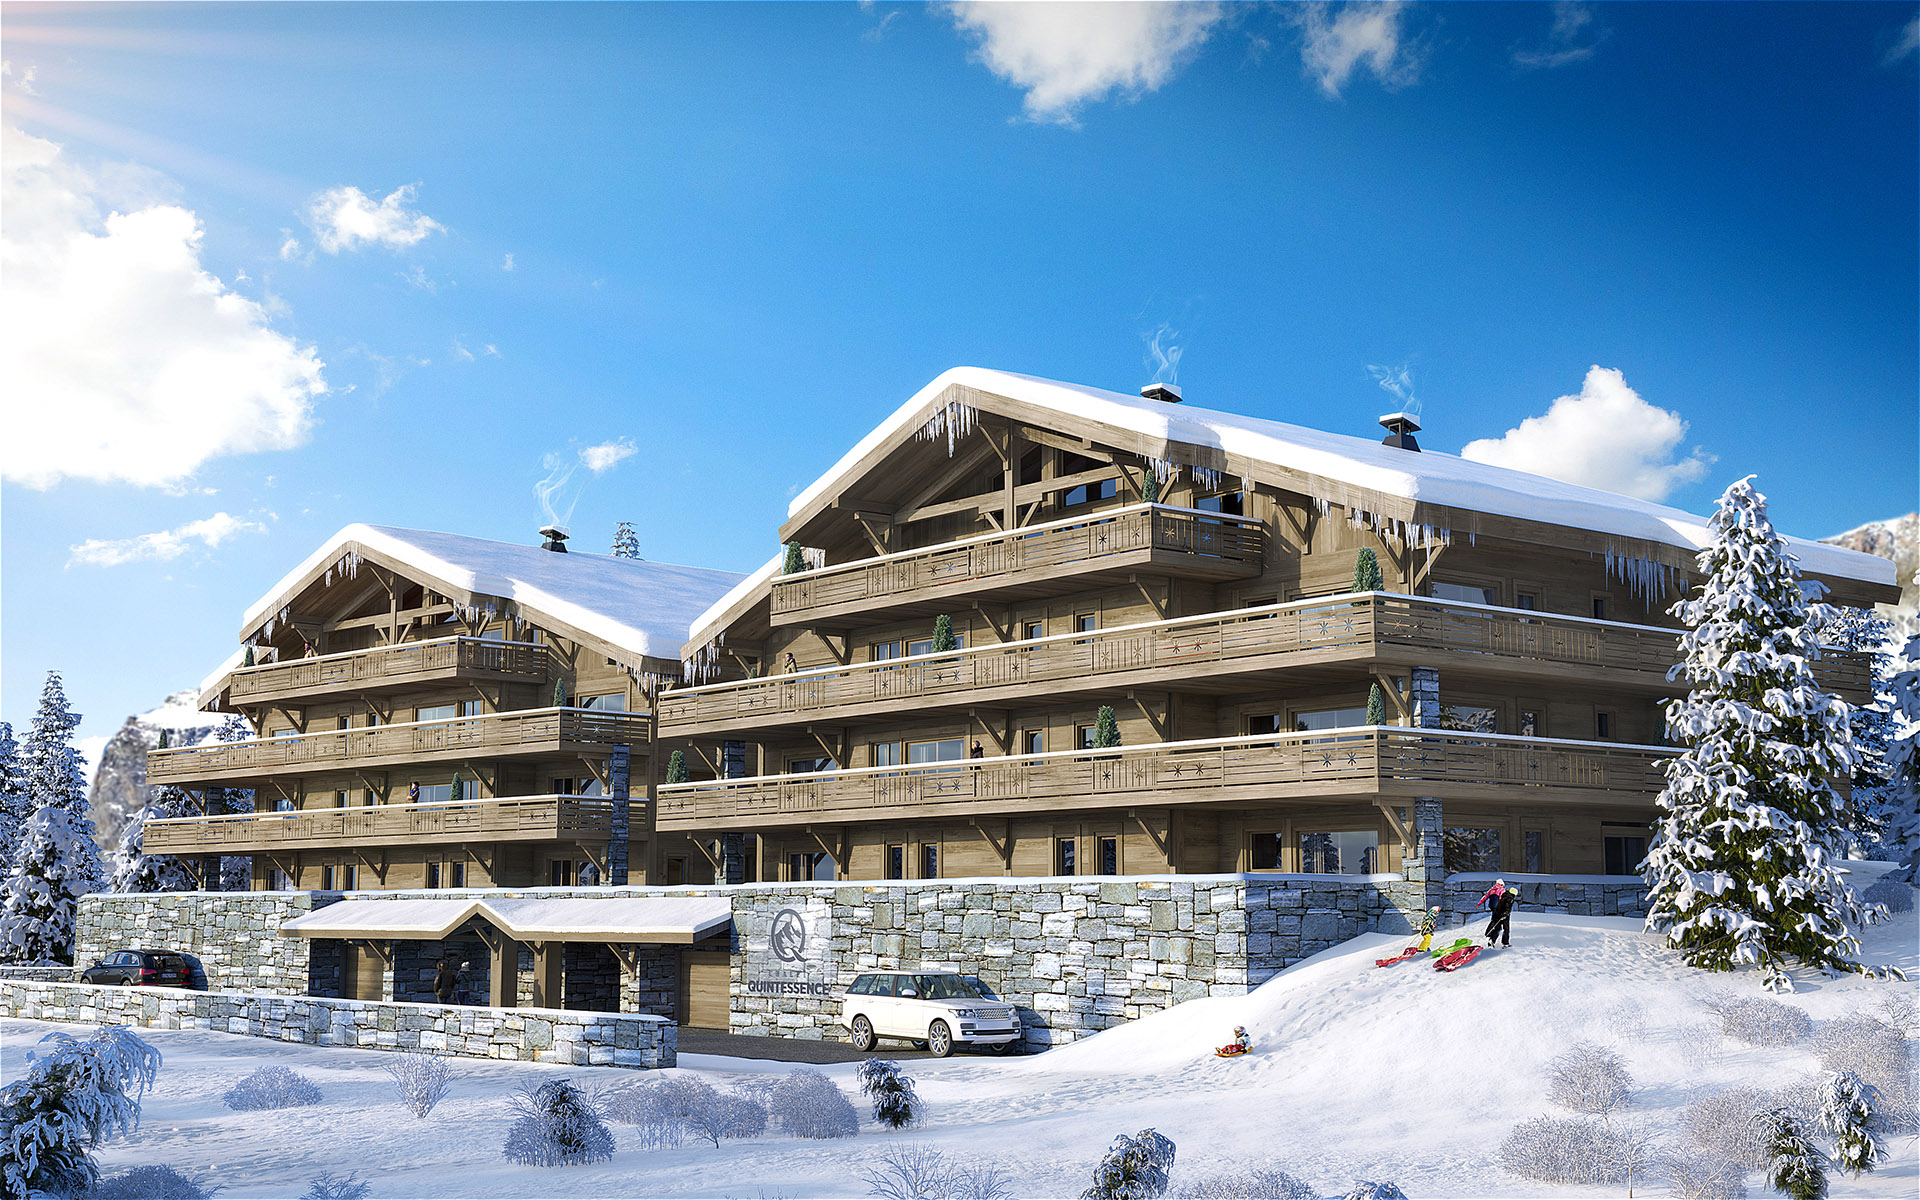 3D computer graphics of luxury collective chalets in the mountains